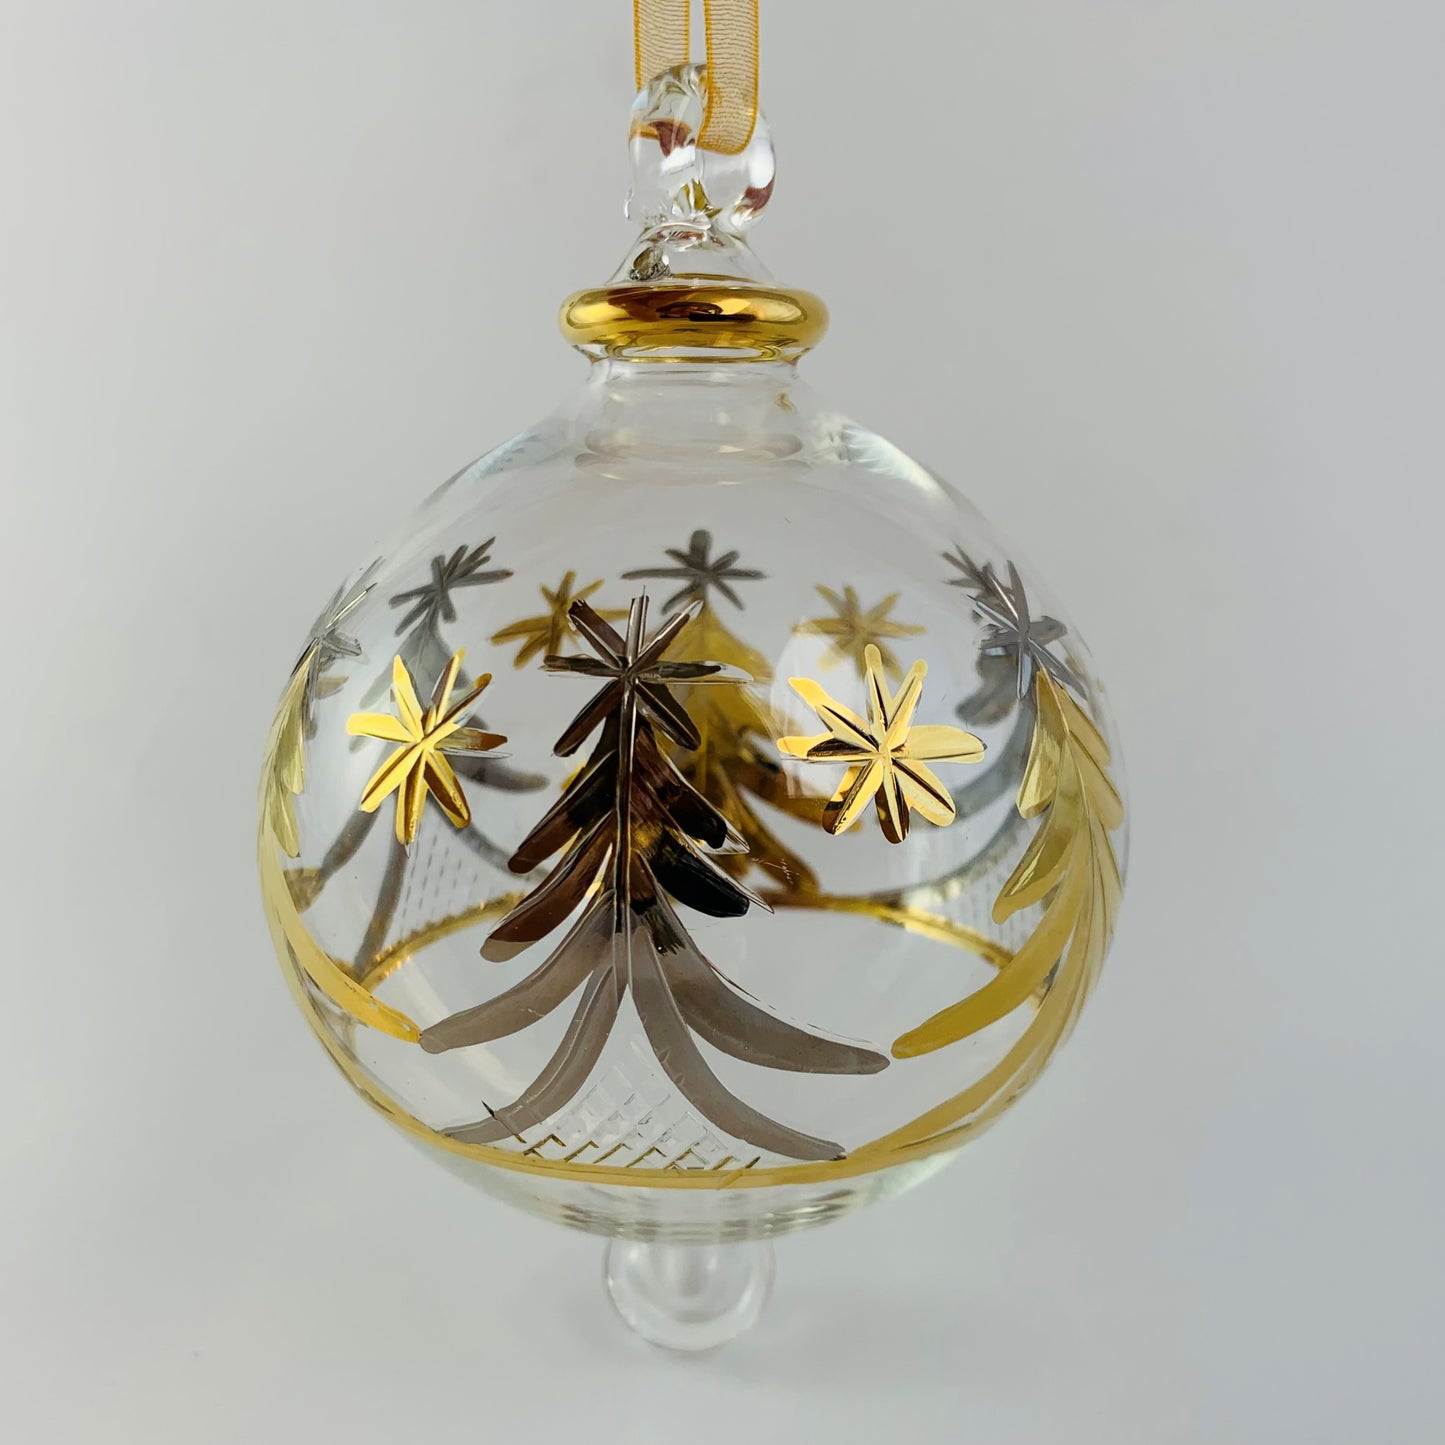 Blown Glass Ornament - Christmas Silver & Gold